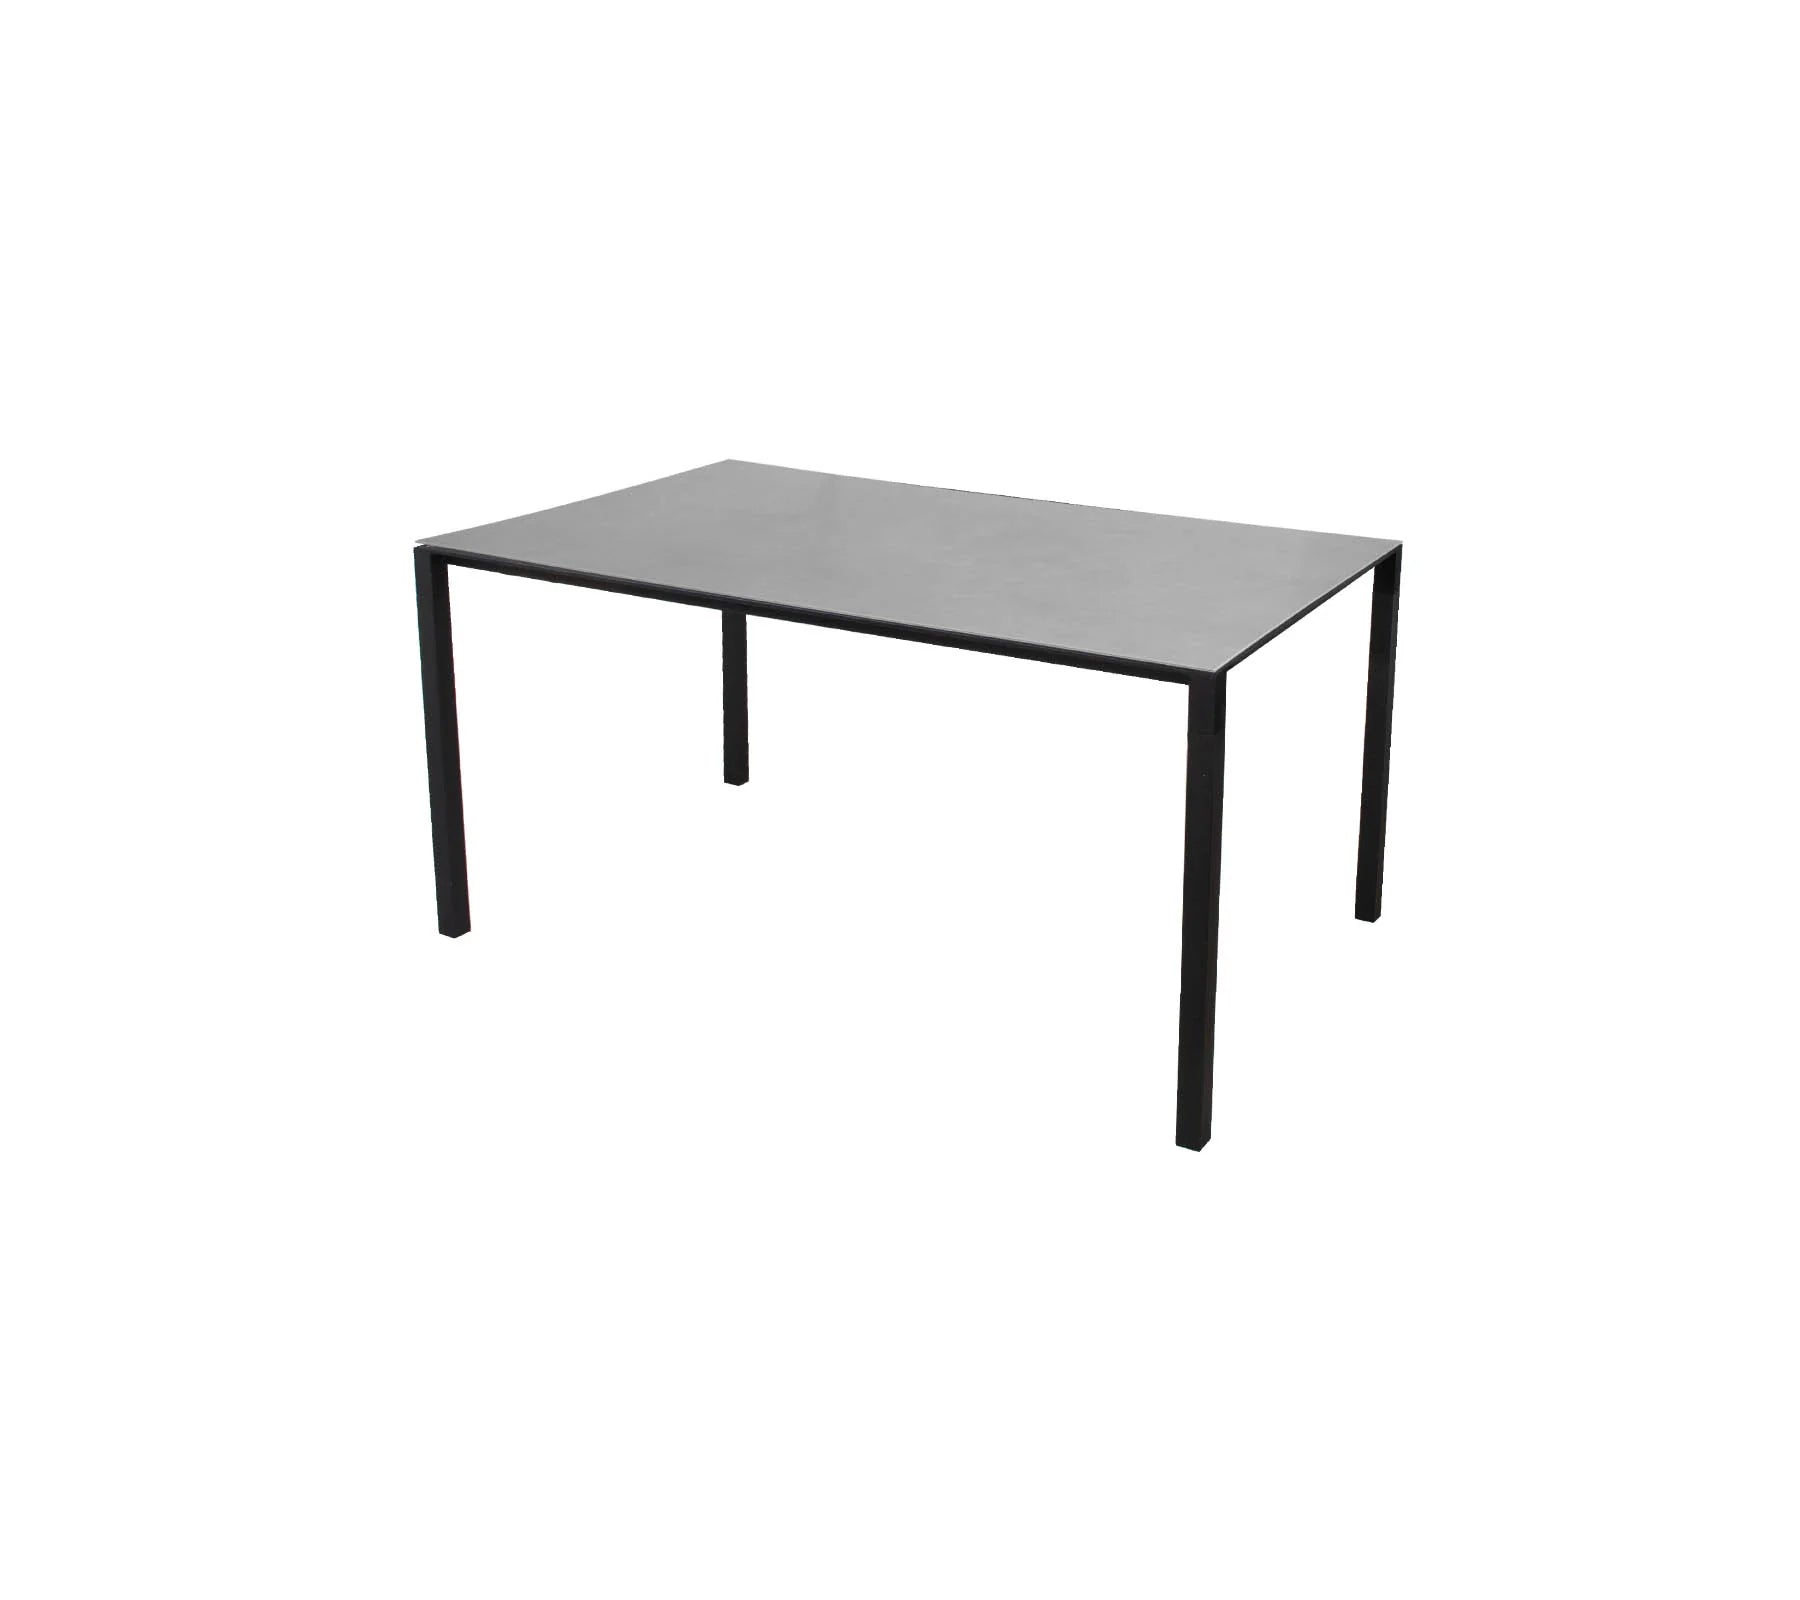 Boxhill's Pure lava grey aluminum outdoor rectangular dining table with light grey table top on white background